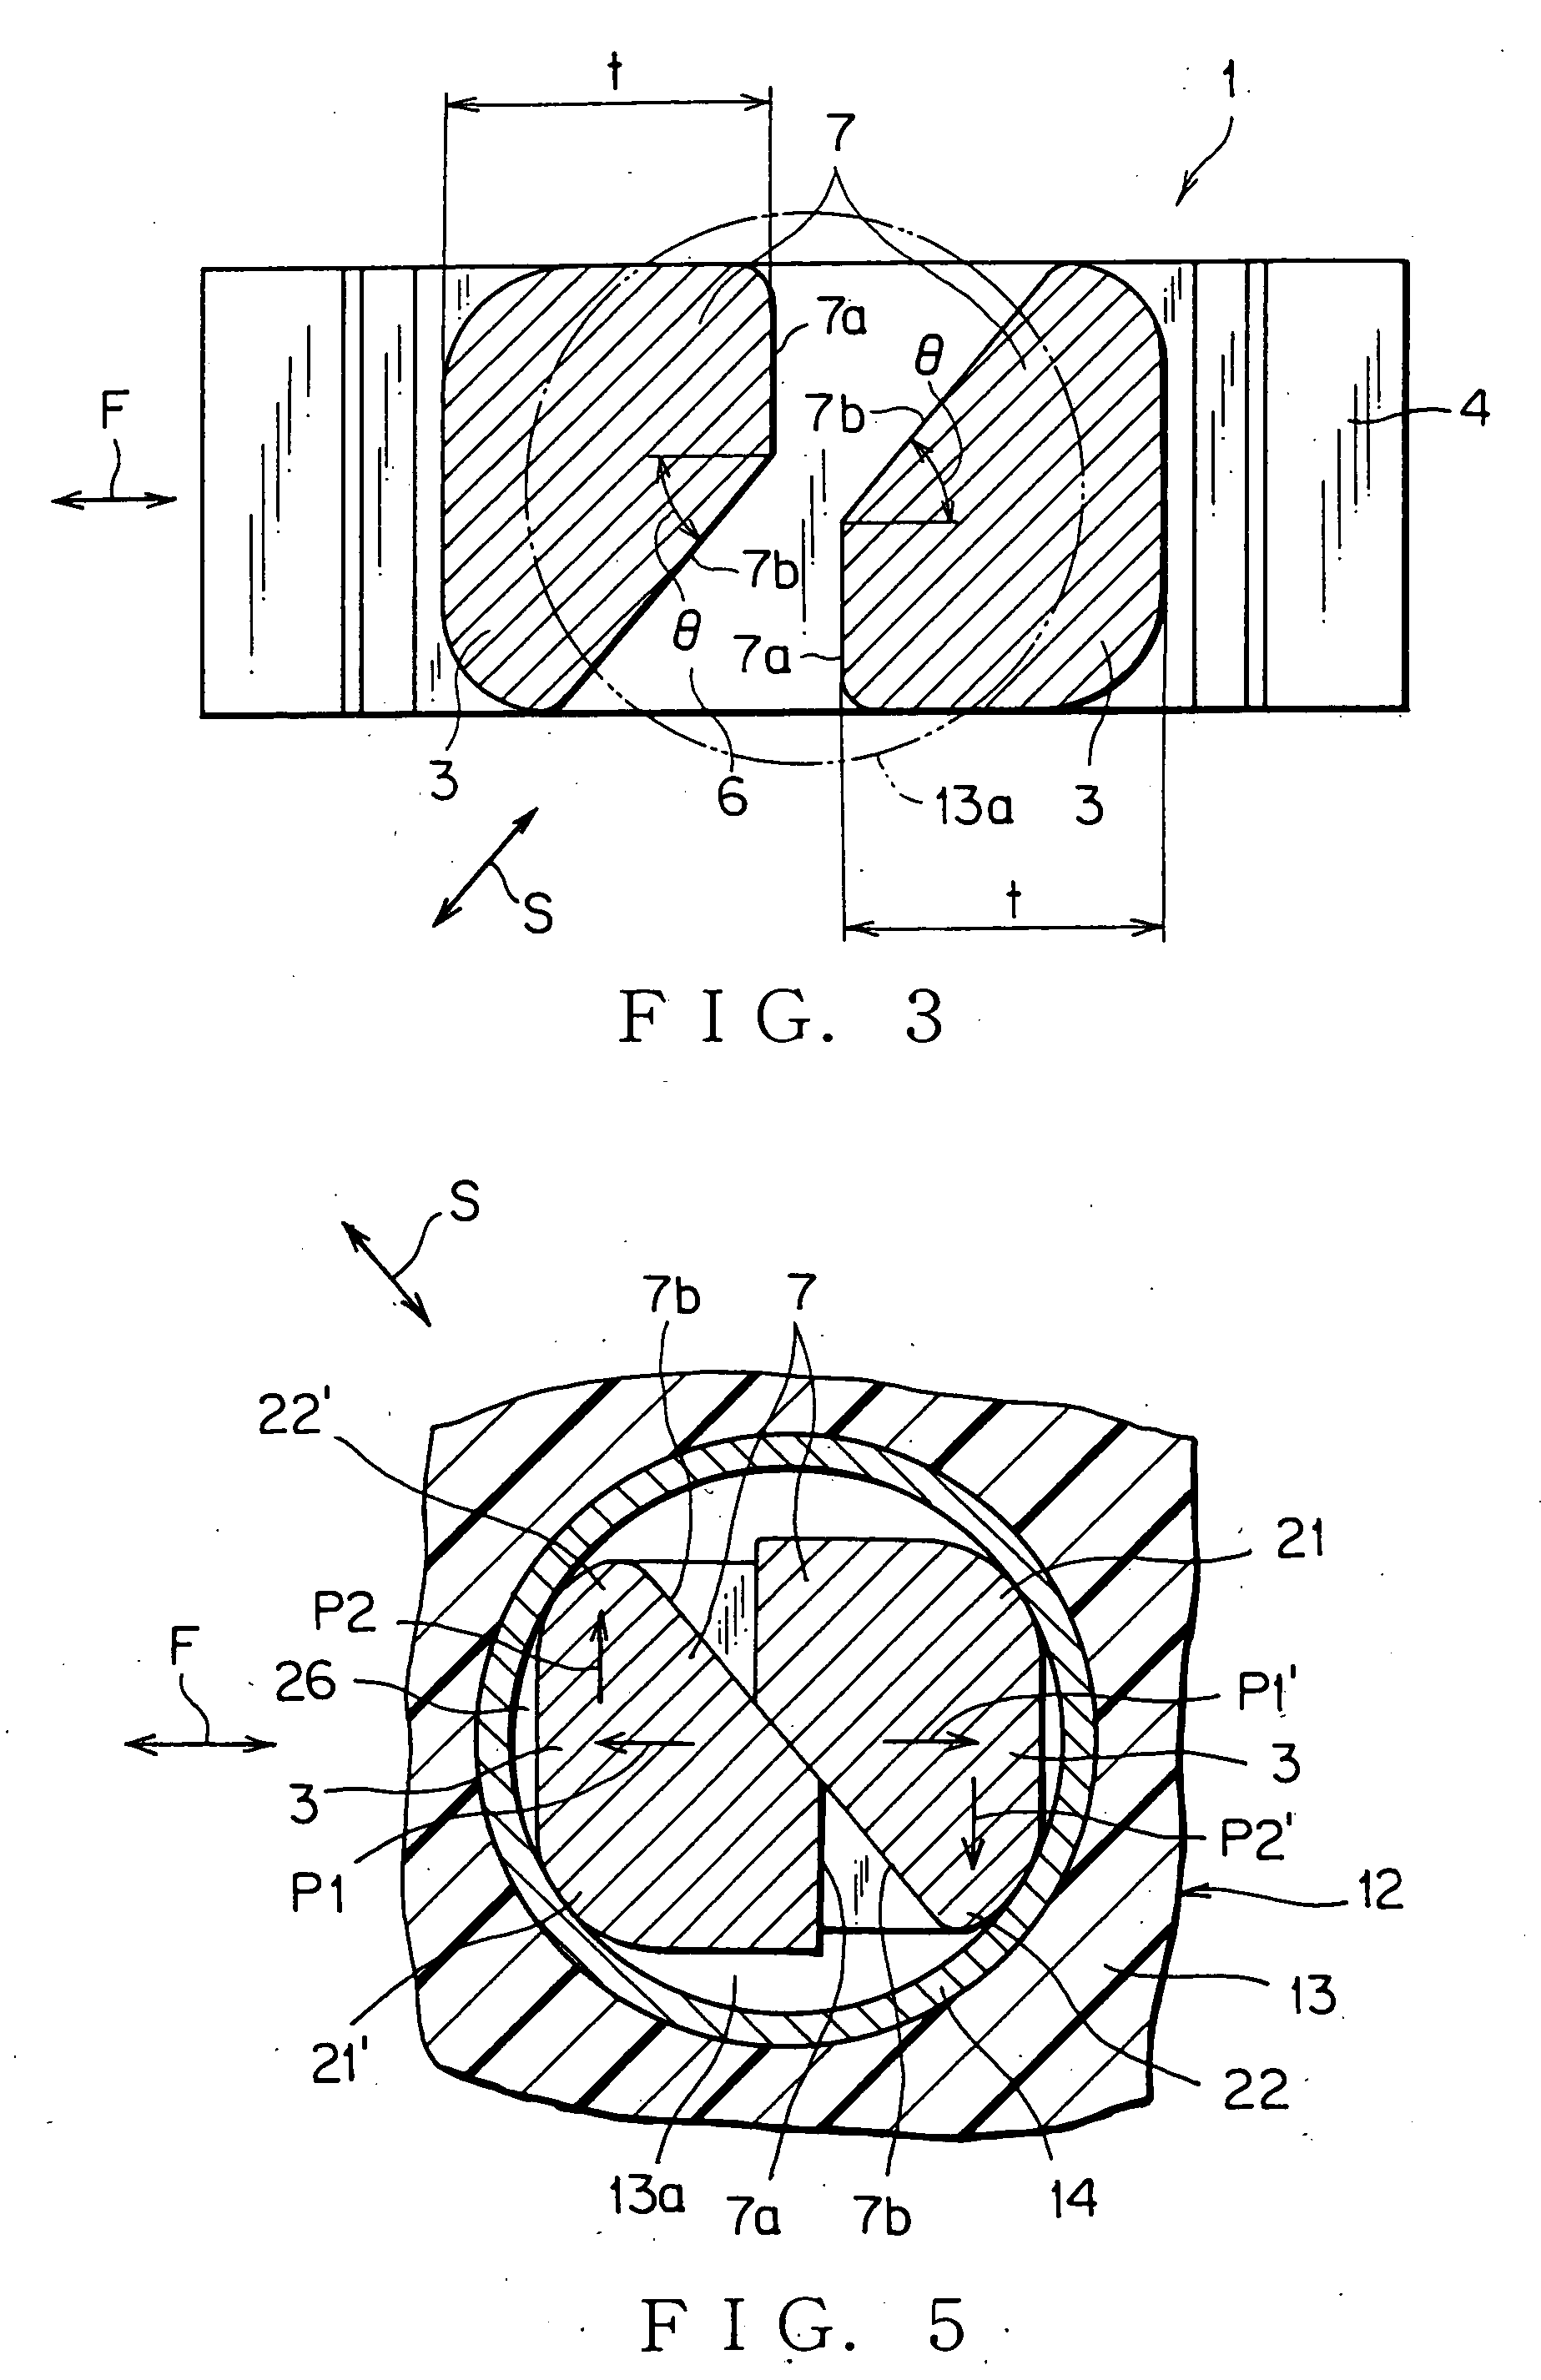 Press-fit terminal and circuit board module using the same